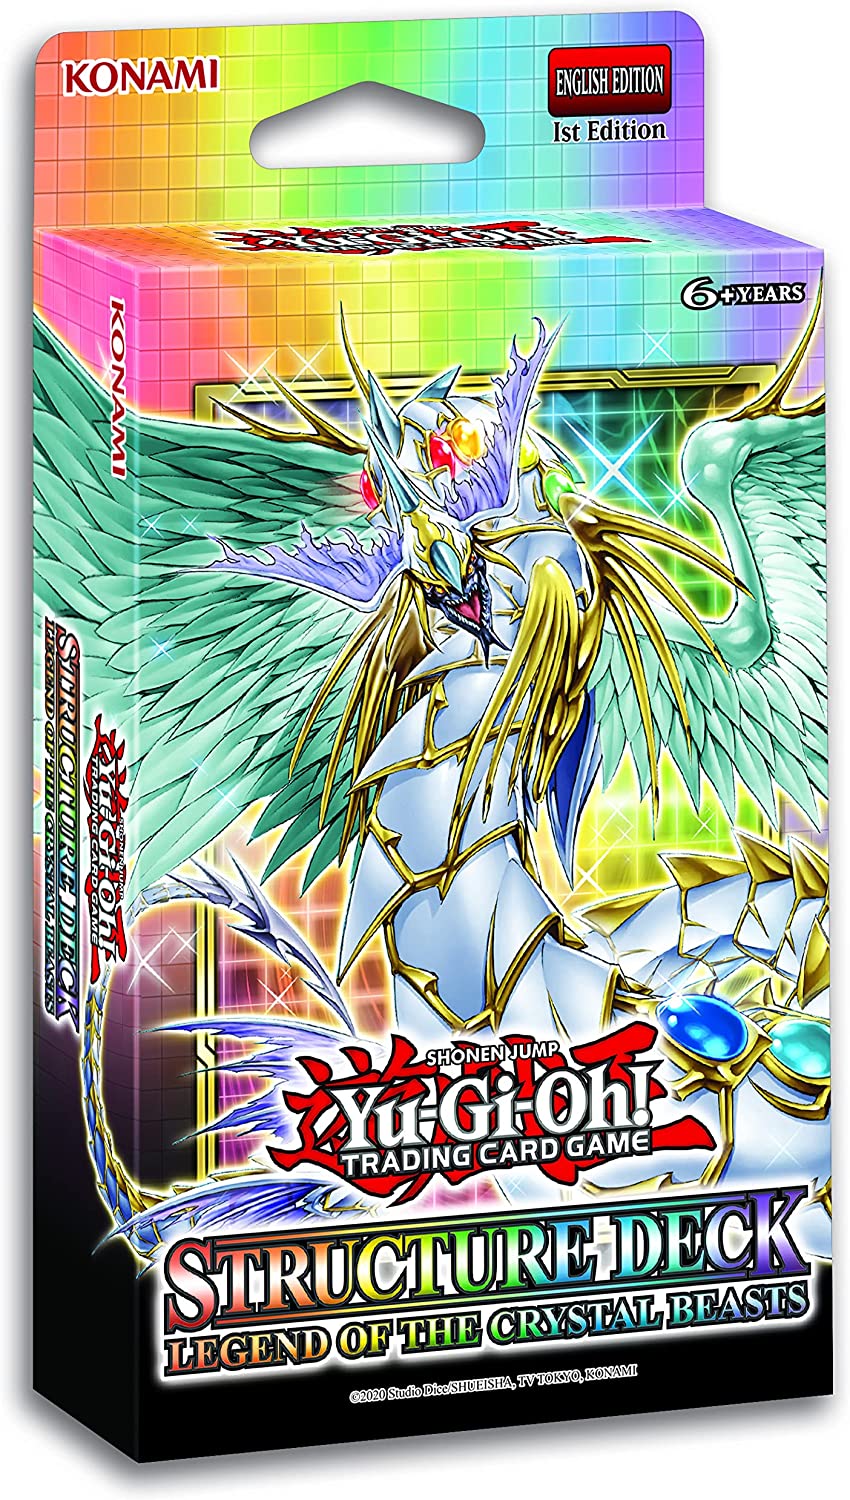 YU-GI-OH! Structure Deck, Legend Of The Crystal Beasts (SDCB) (8er-Pack)